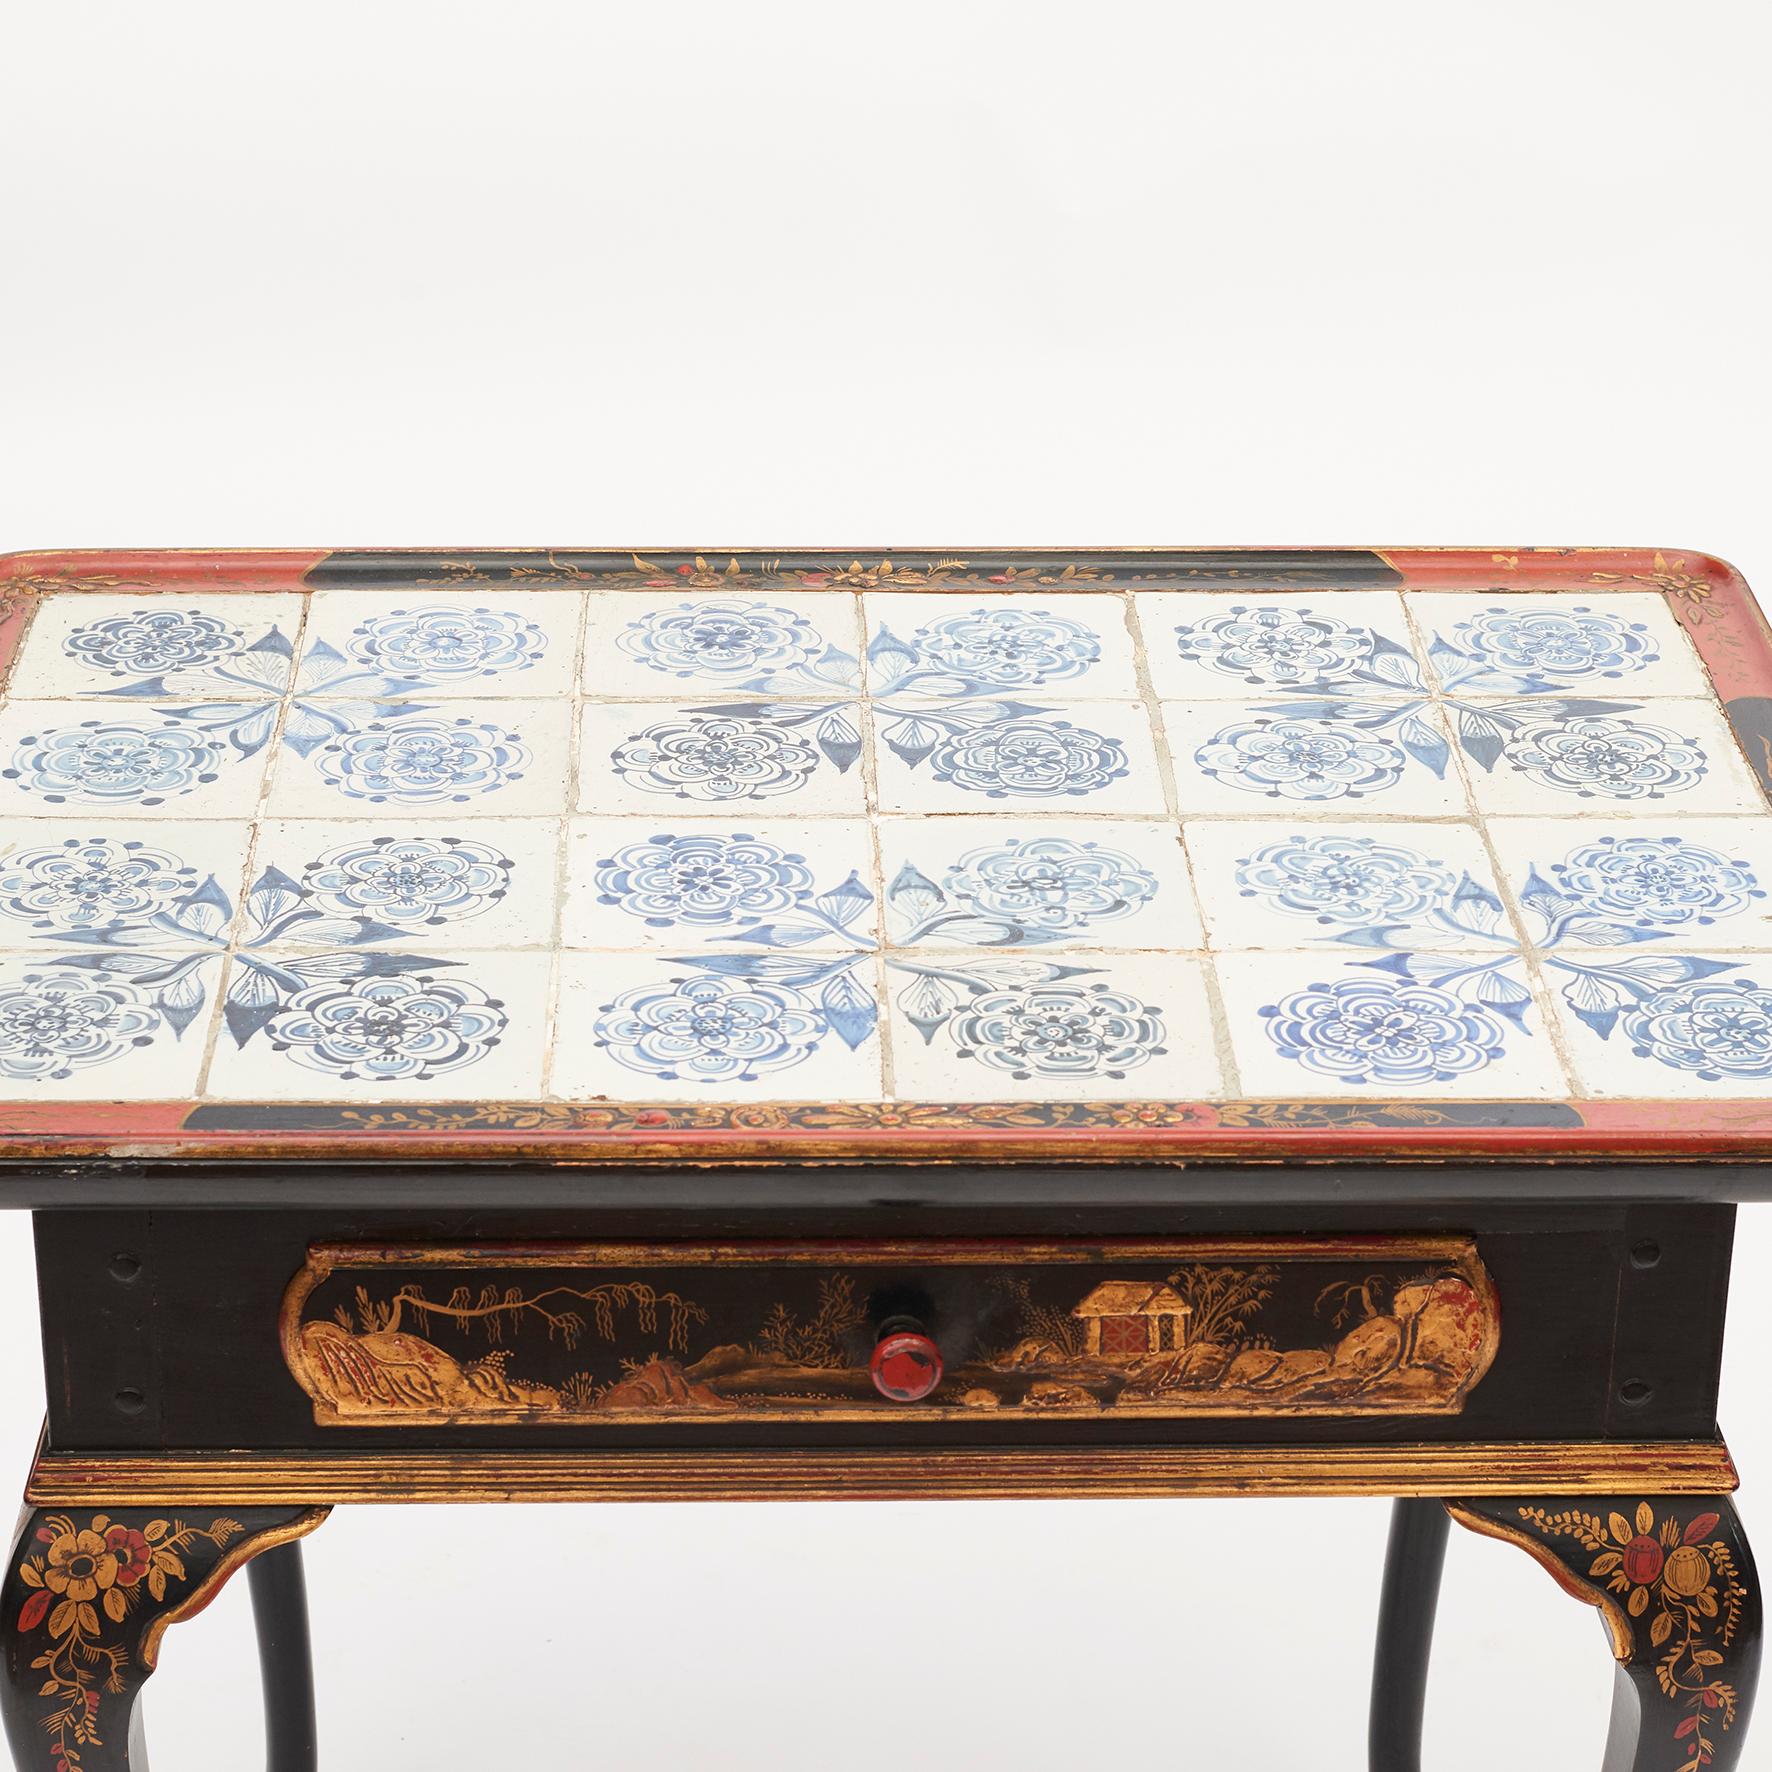 Beech Danish Rococo Tile-Top Table with Chinese Motifs